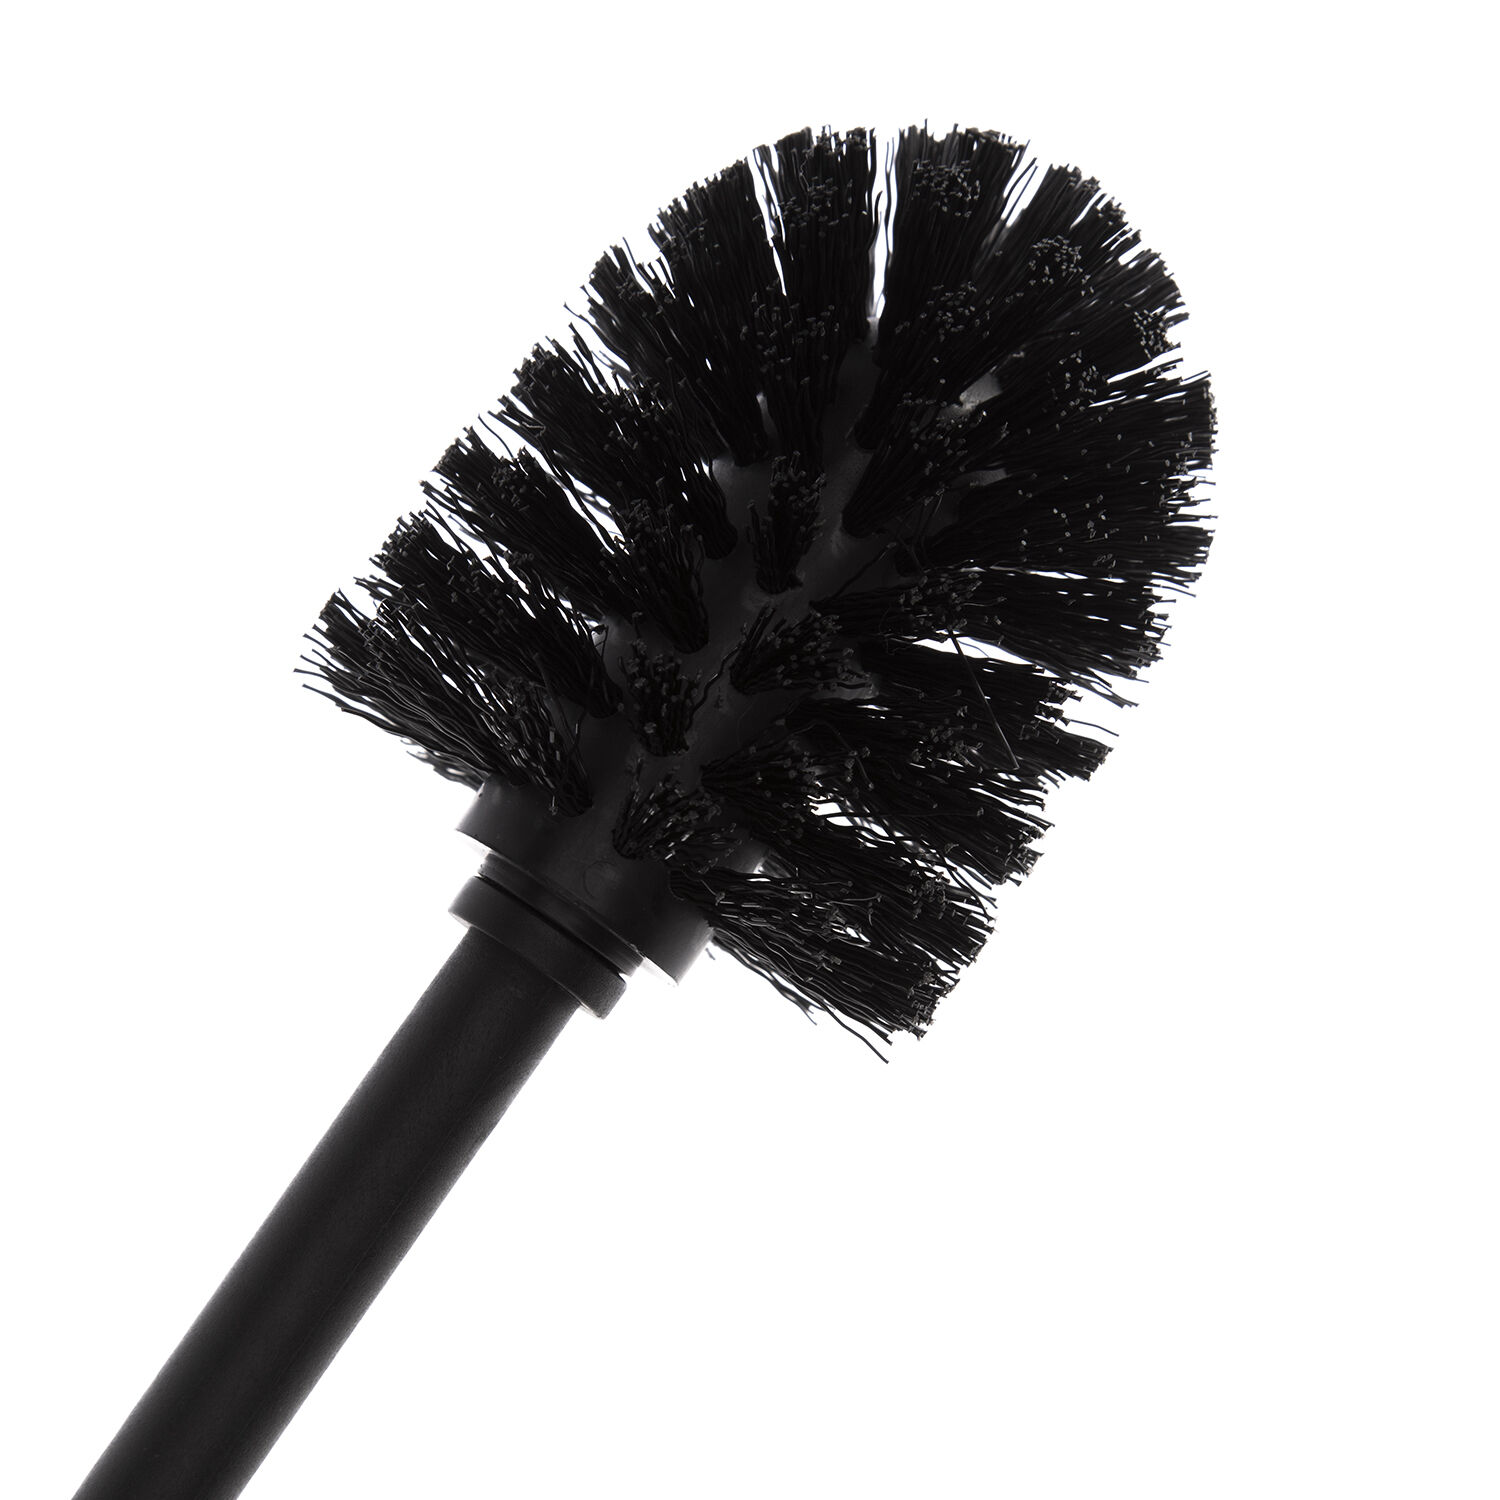 Spiral Embossed Toilet Brush - Stainless Steel - Home Store + More